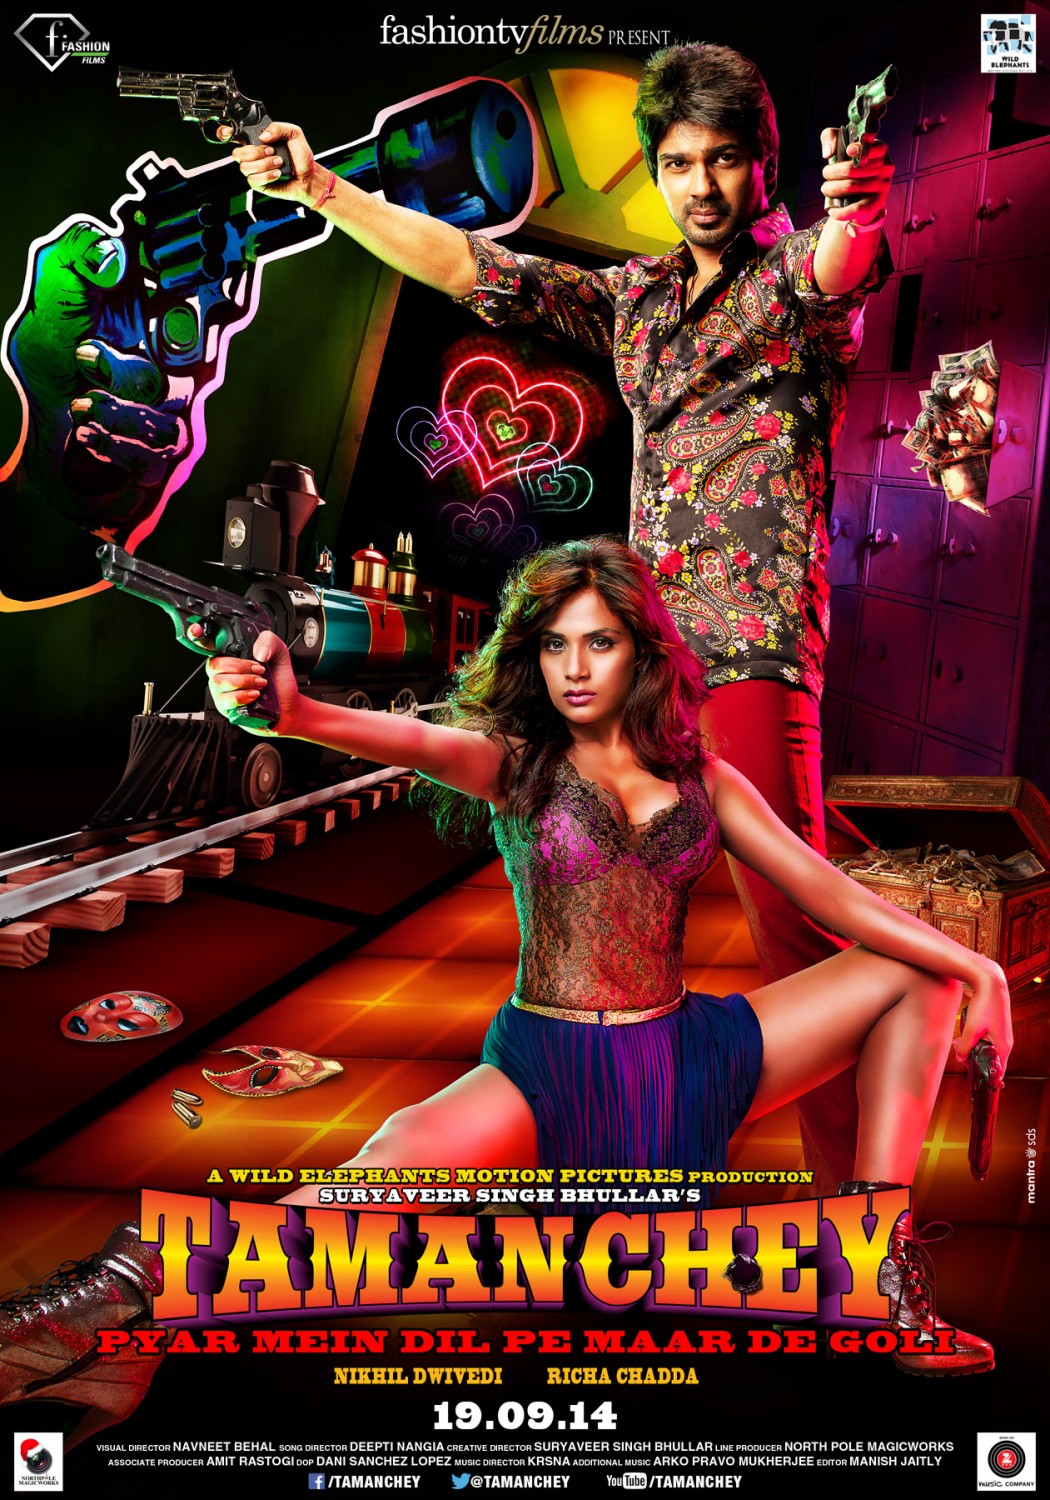 Extra Large Movie Poster Image for Tamanchey (#2 of 2)